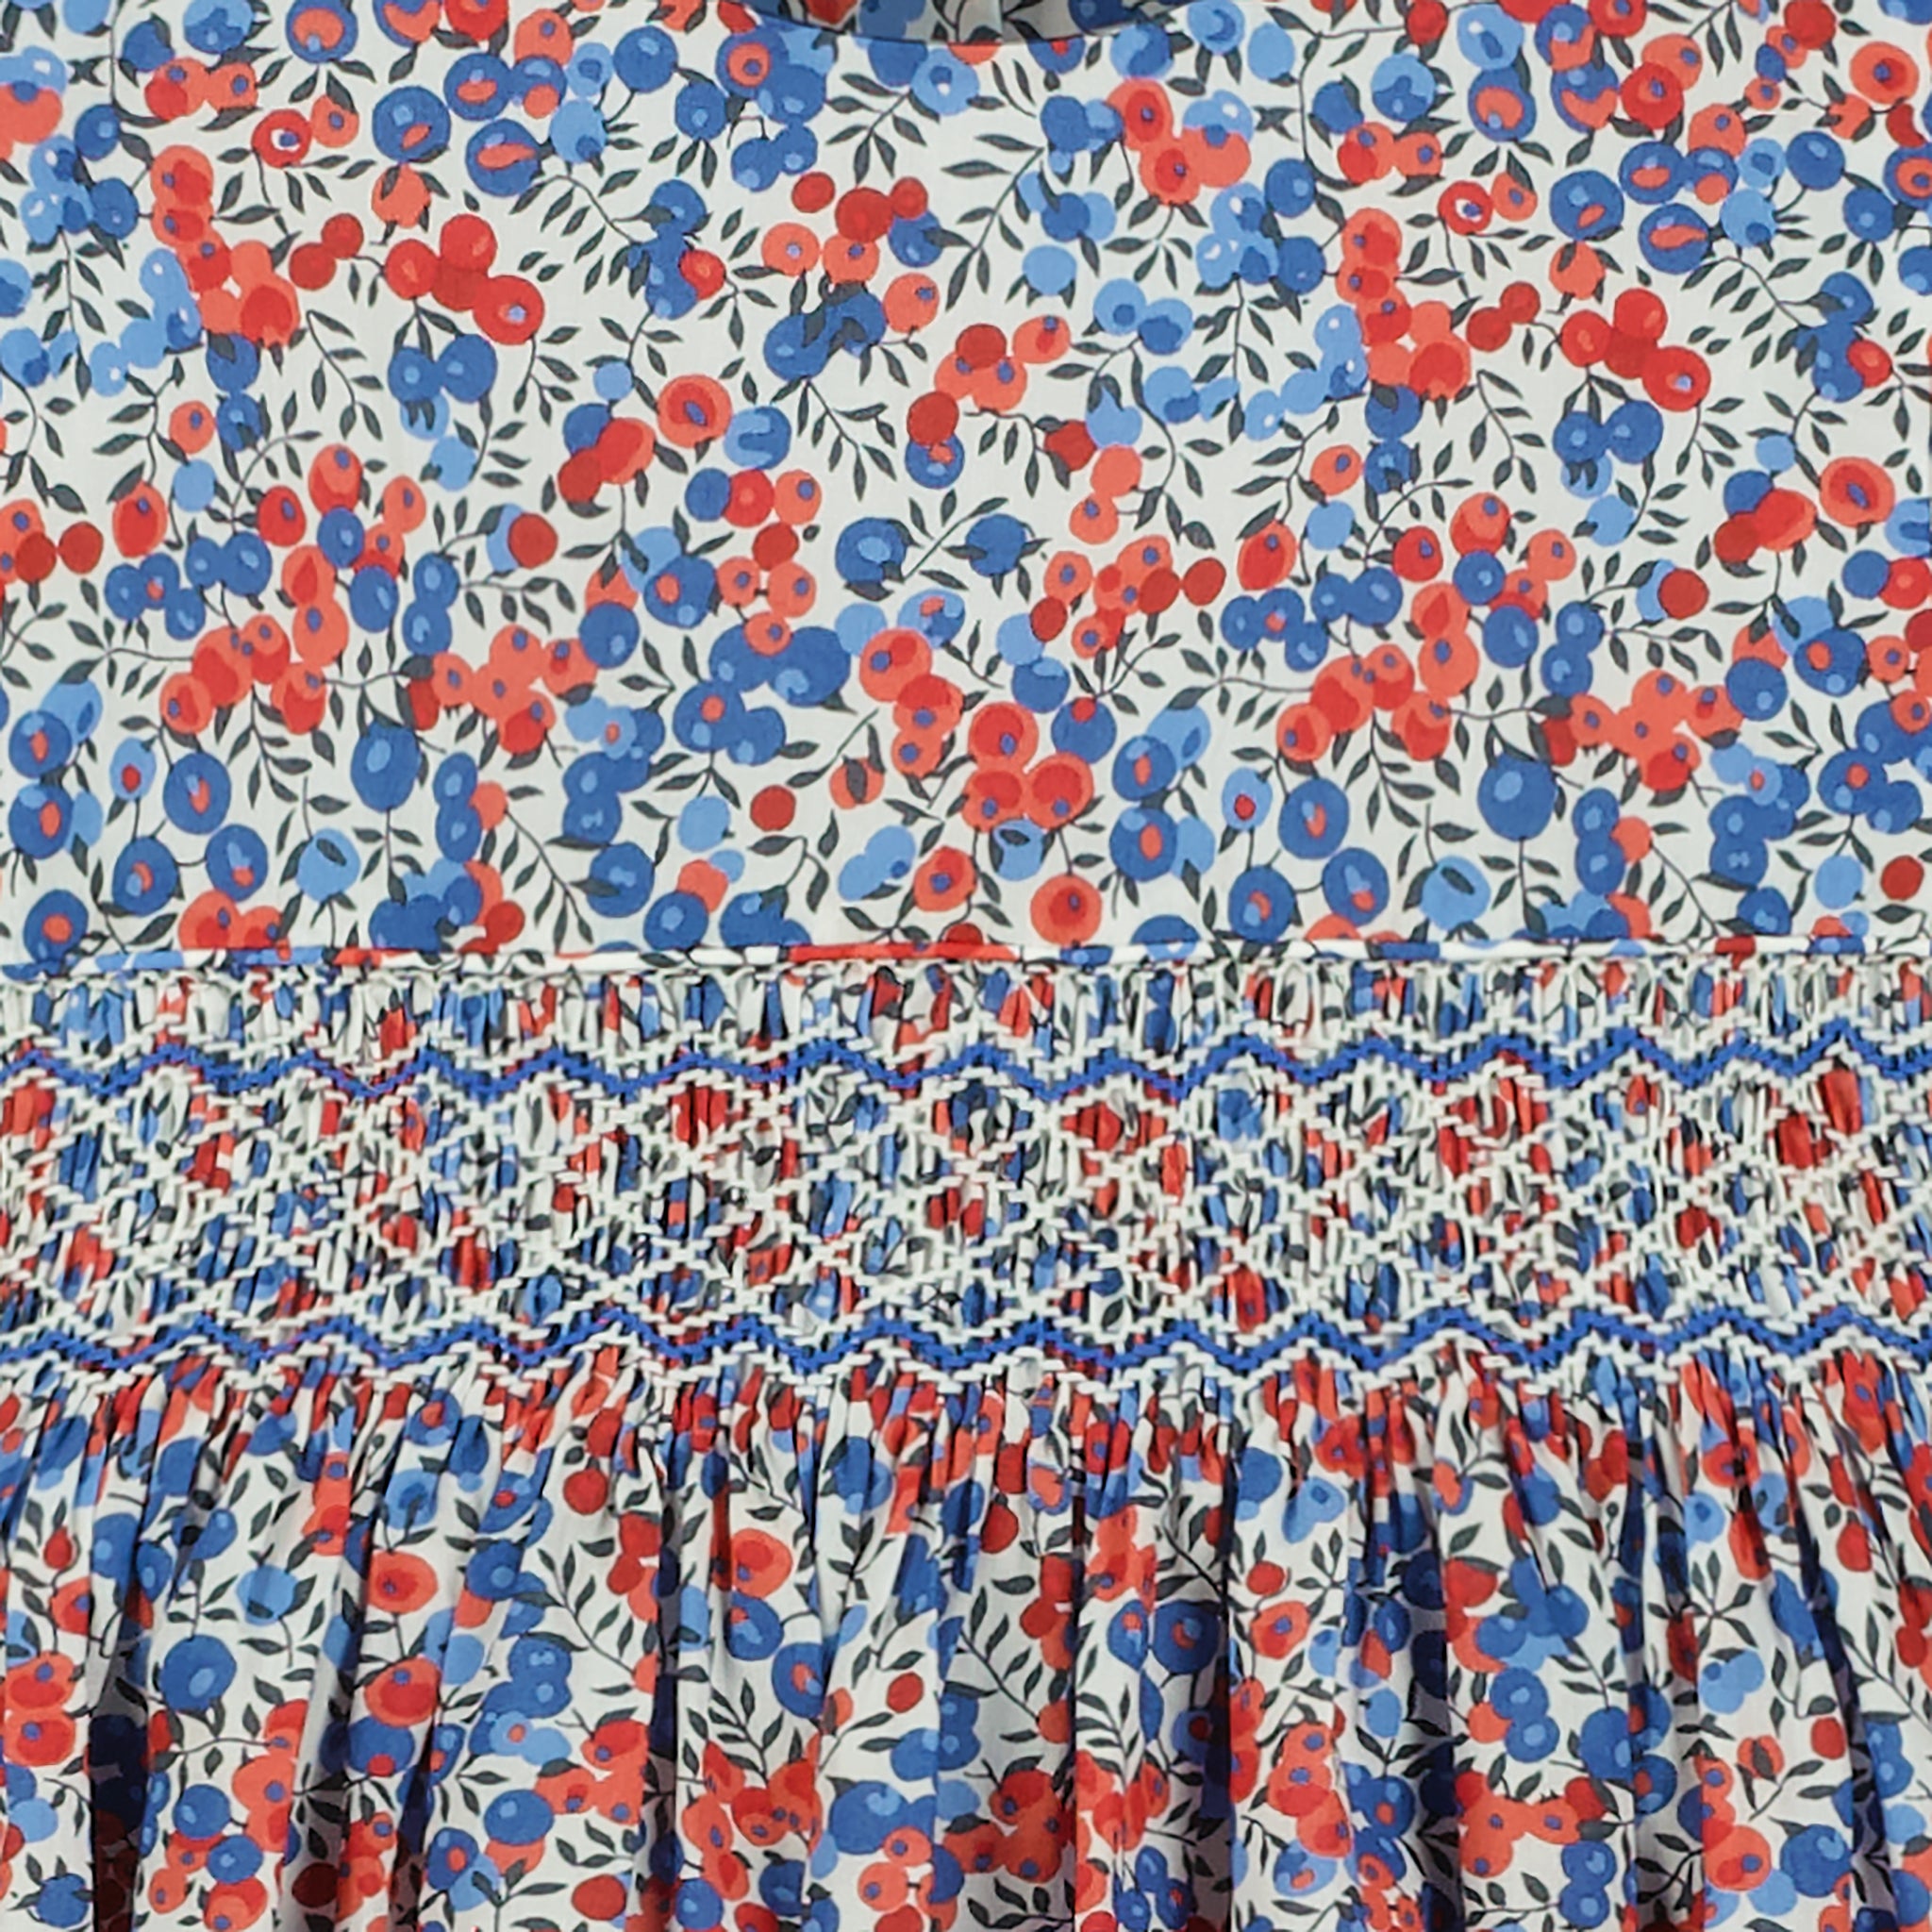 smocked dress made with Liberty Fabric, Wiltshire, blue and red, hand-smocked, detail